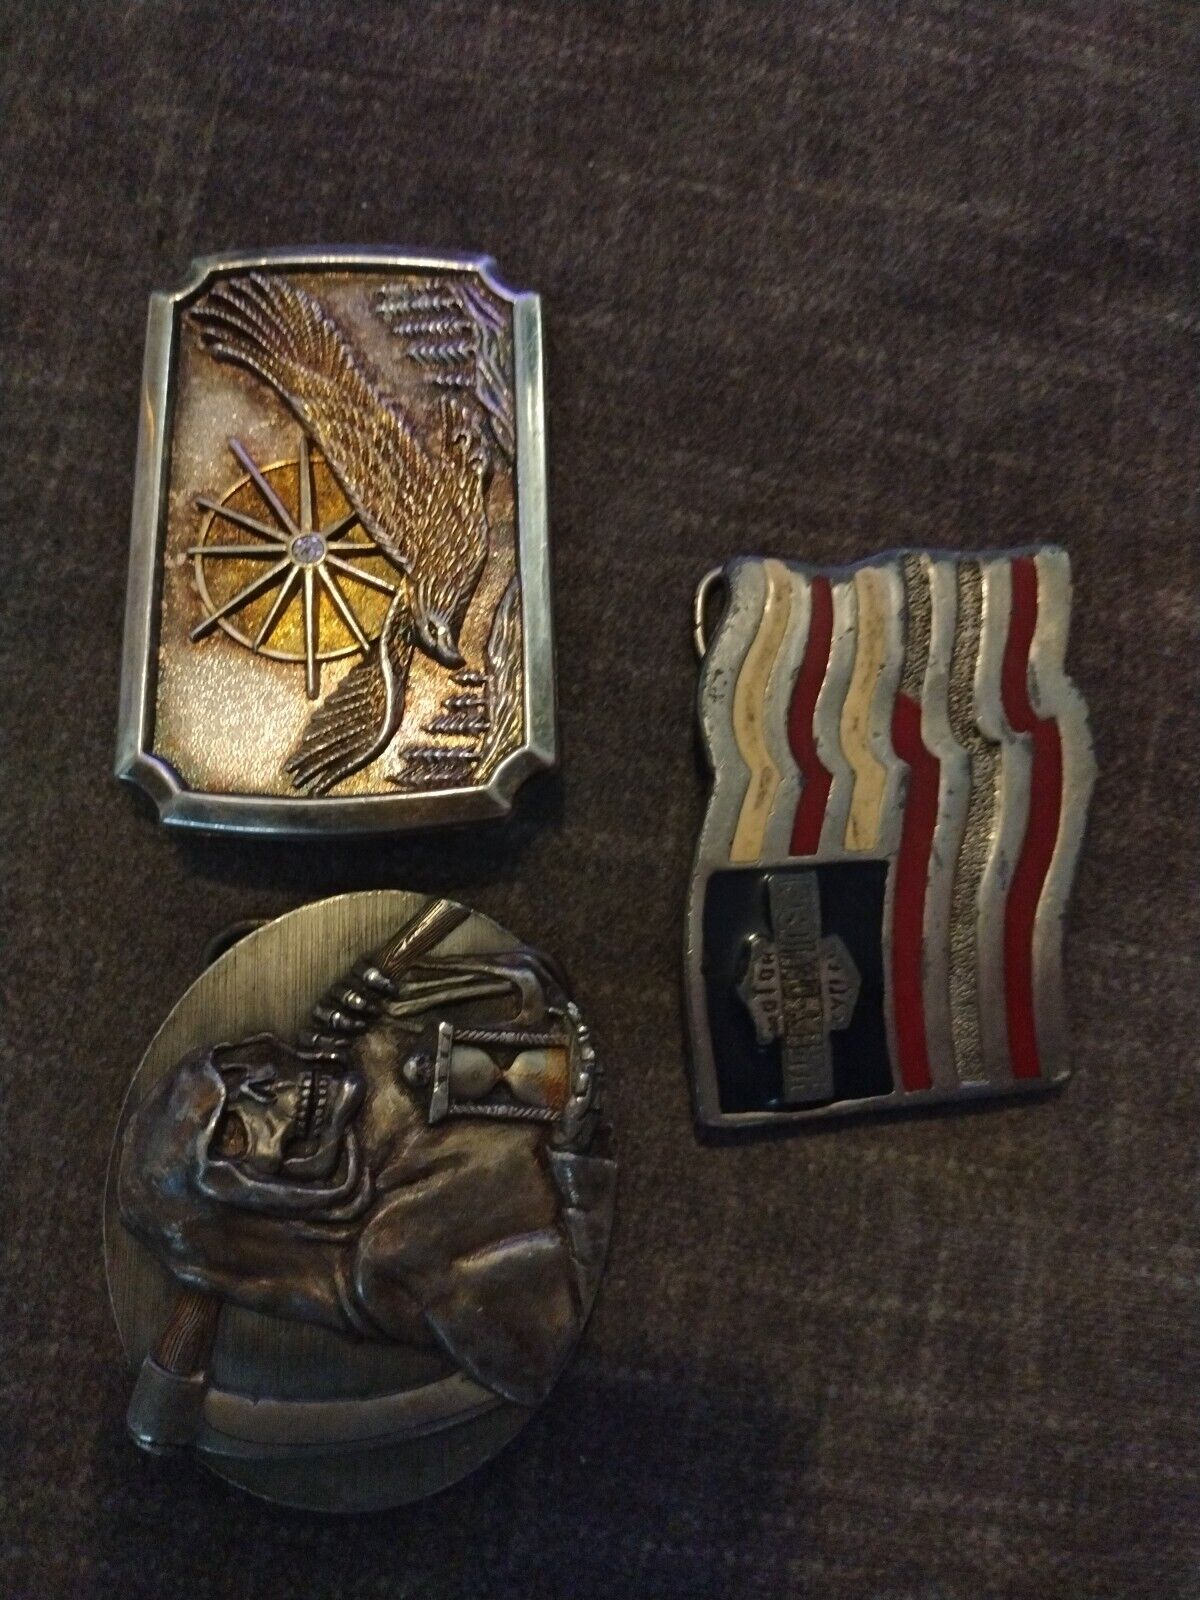 Harley Davidson 1981-2000 Collective Belt Buckles Will Sell Separately Or As Set